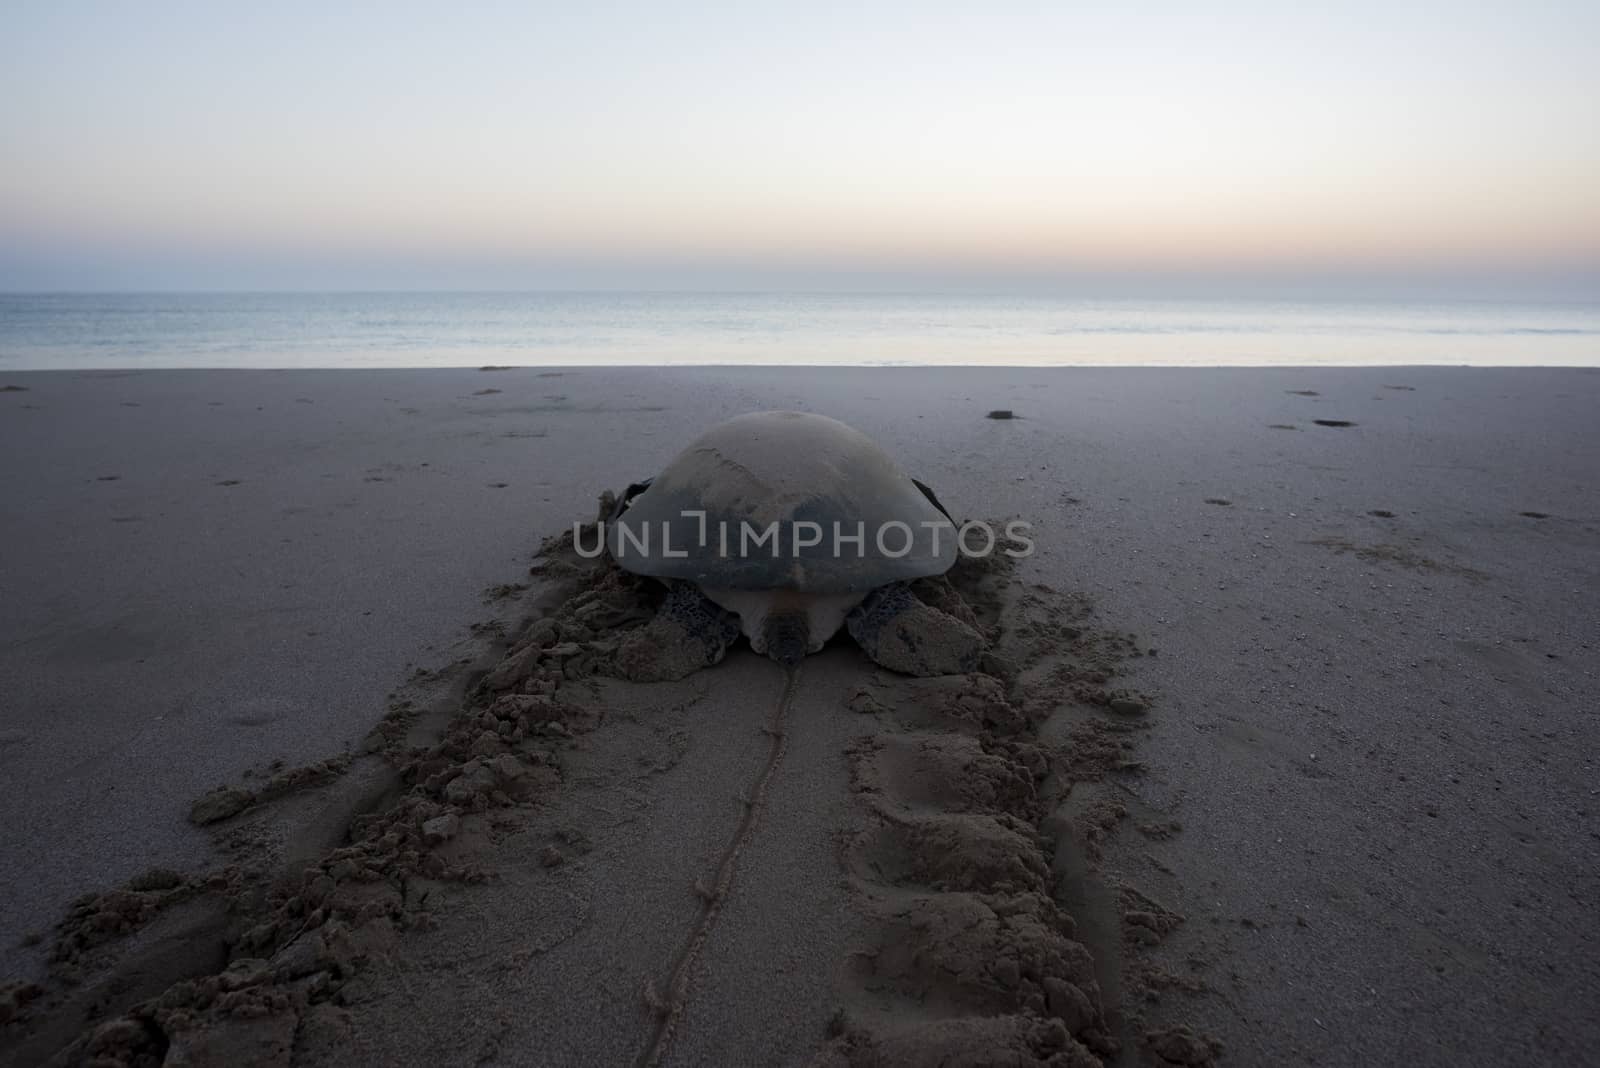 Sea turtle tired after nesting during the night and trying to get back to the ocean before the sun rise. early Morning in Ras Al Hadd, Sultanate of Oman